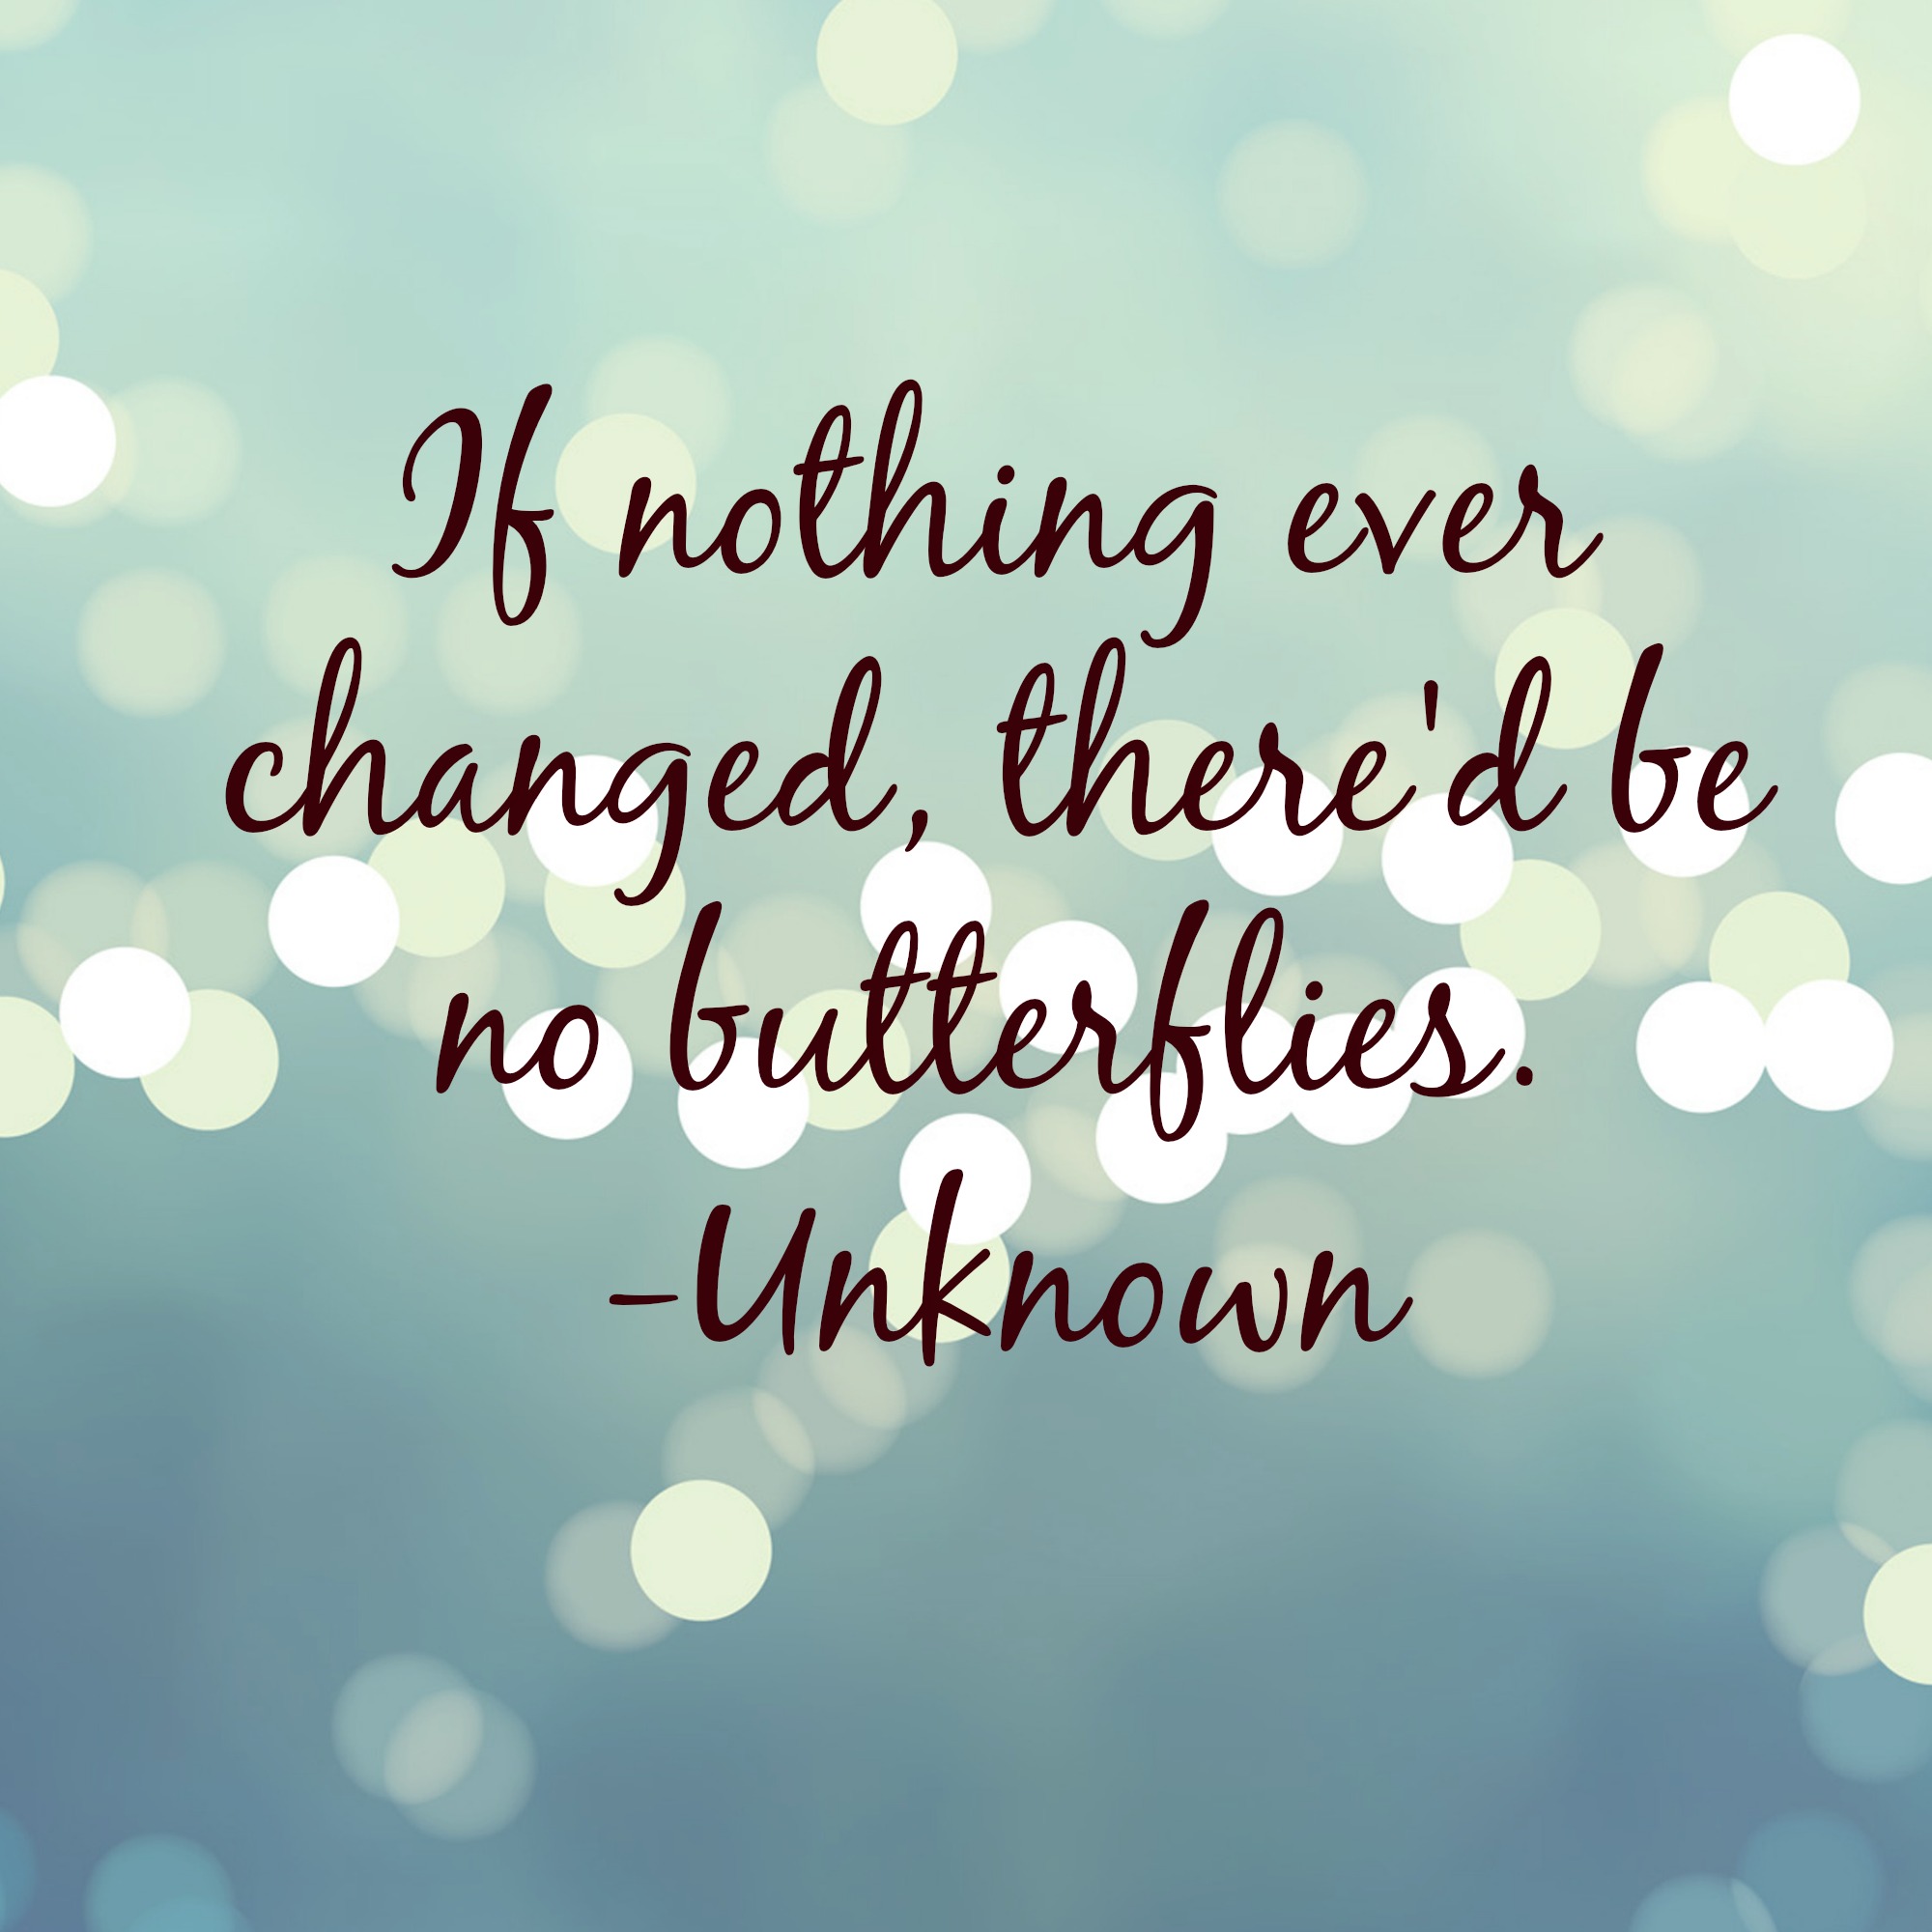 Inspirational Quotes On Accepting Change. QuotesGram